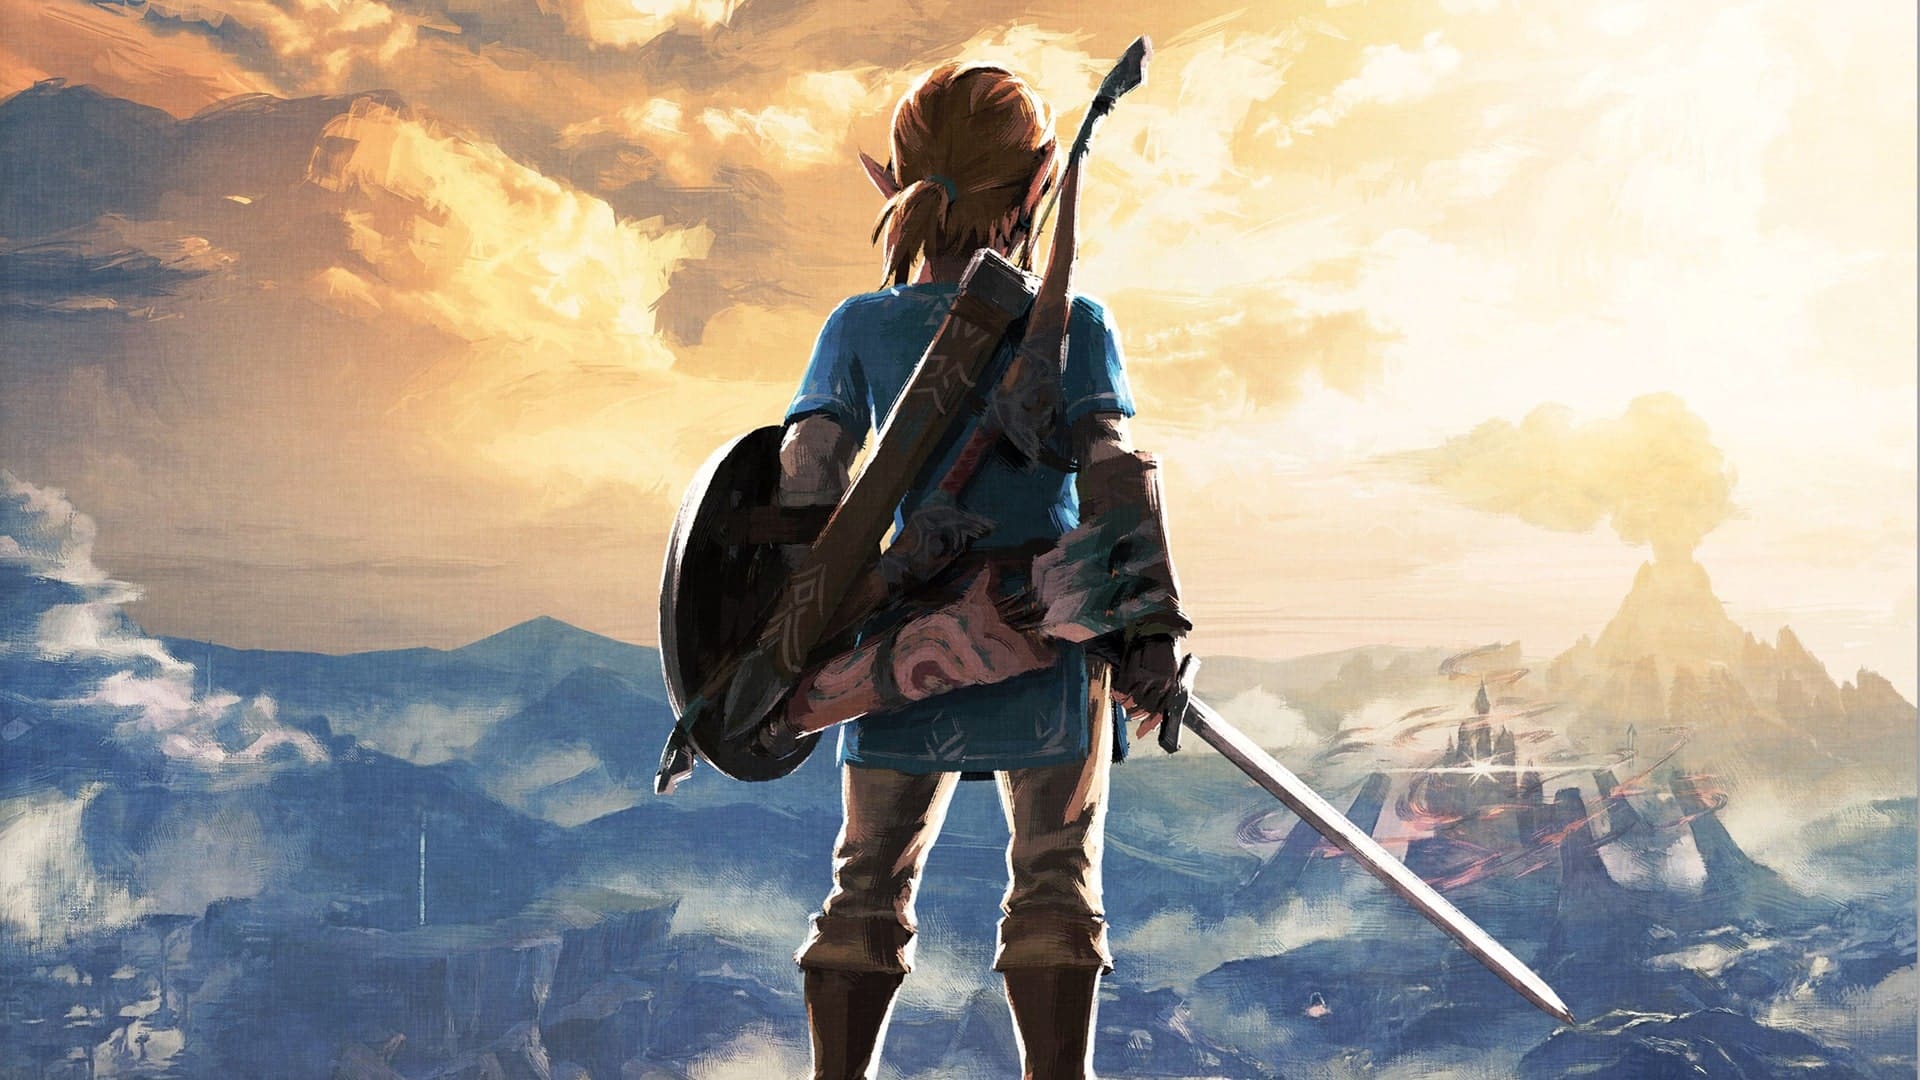 The Legend of Zelda: Breath of the Wild Sequel Pushed to 2023